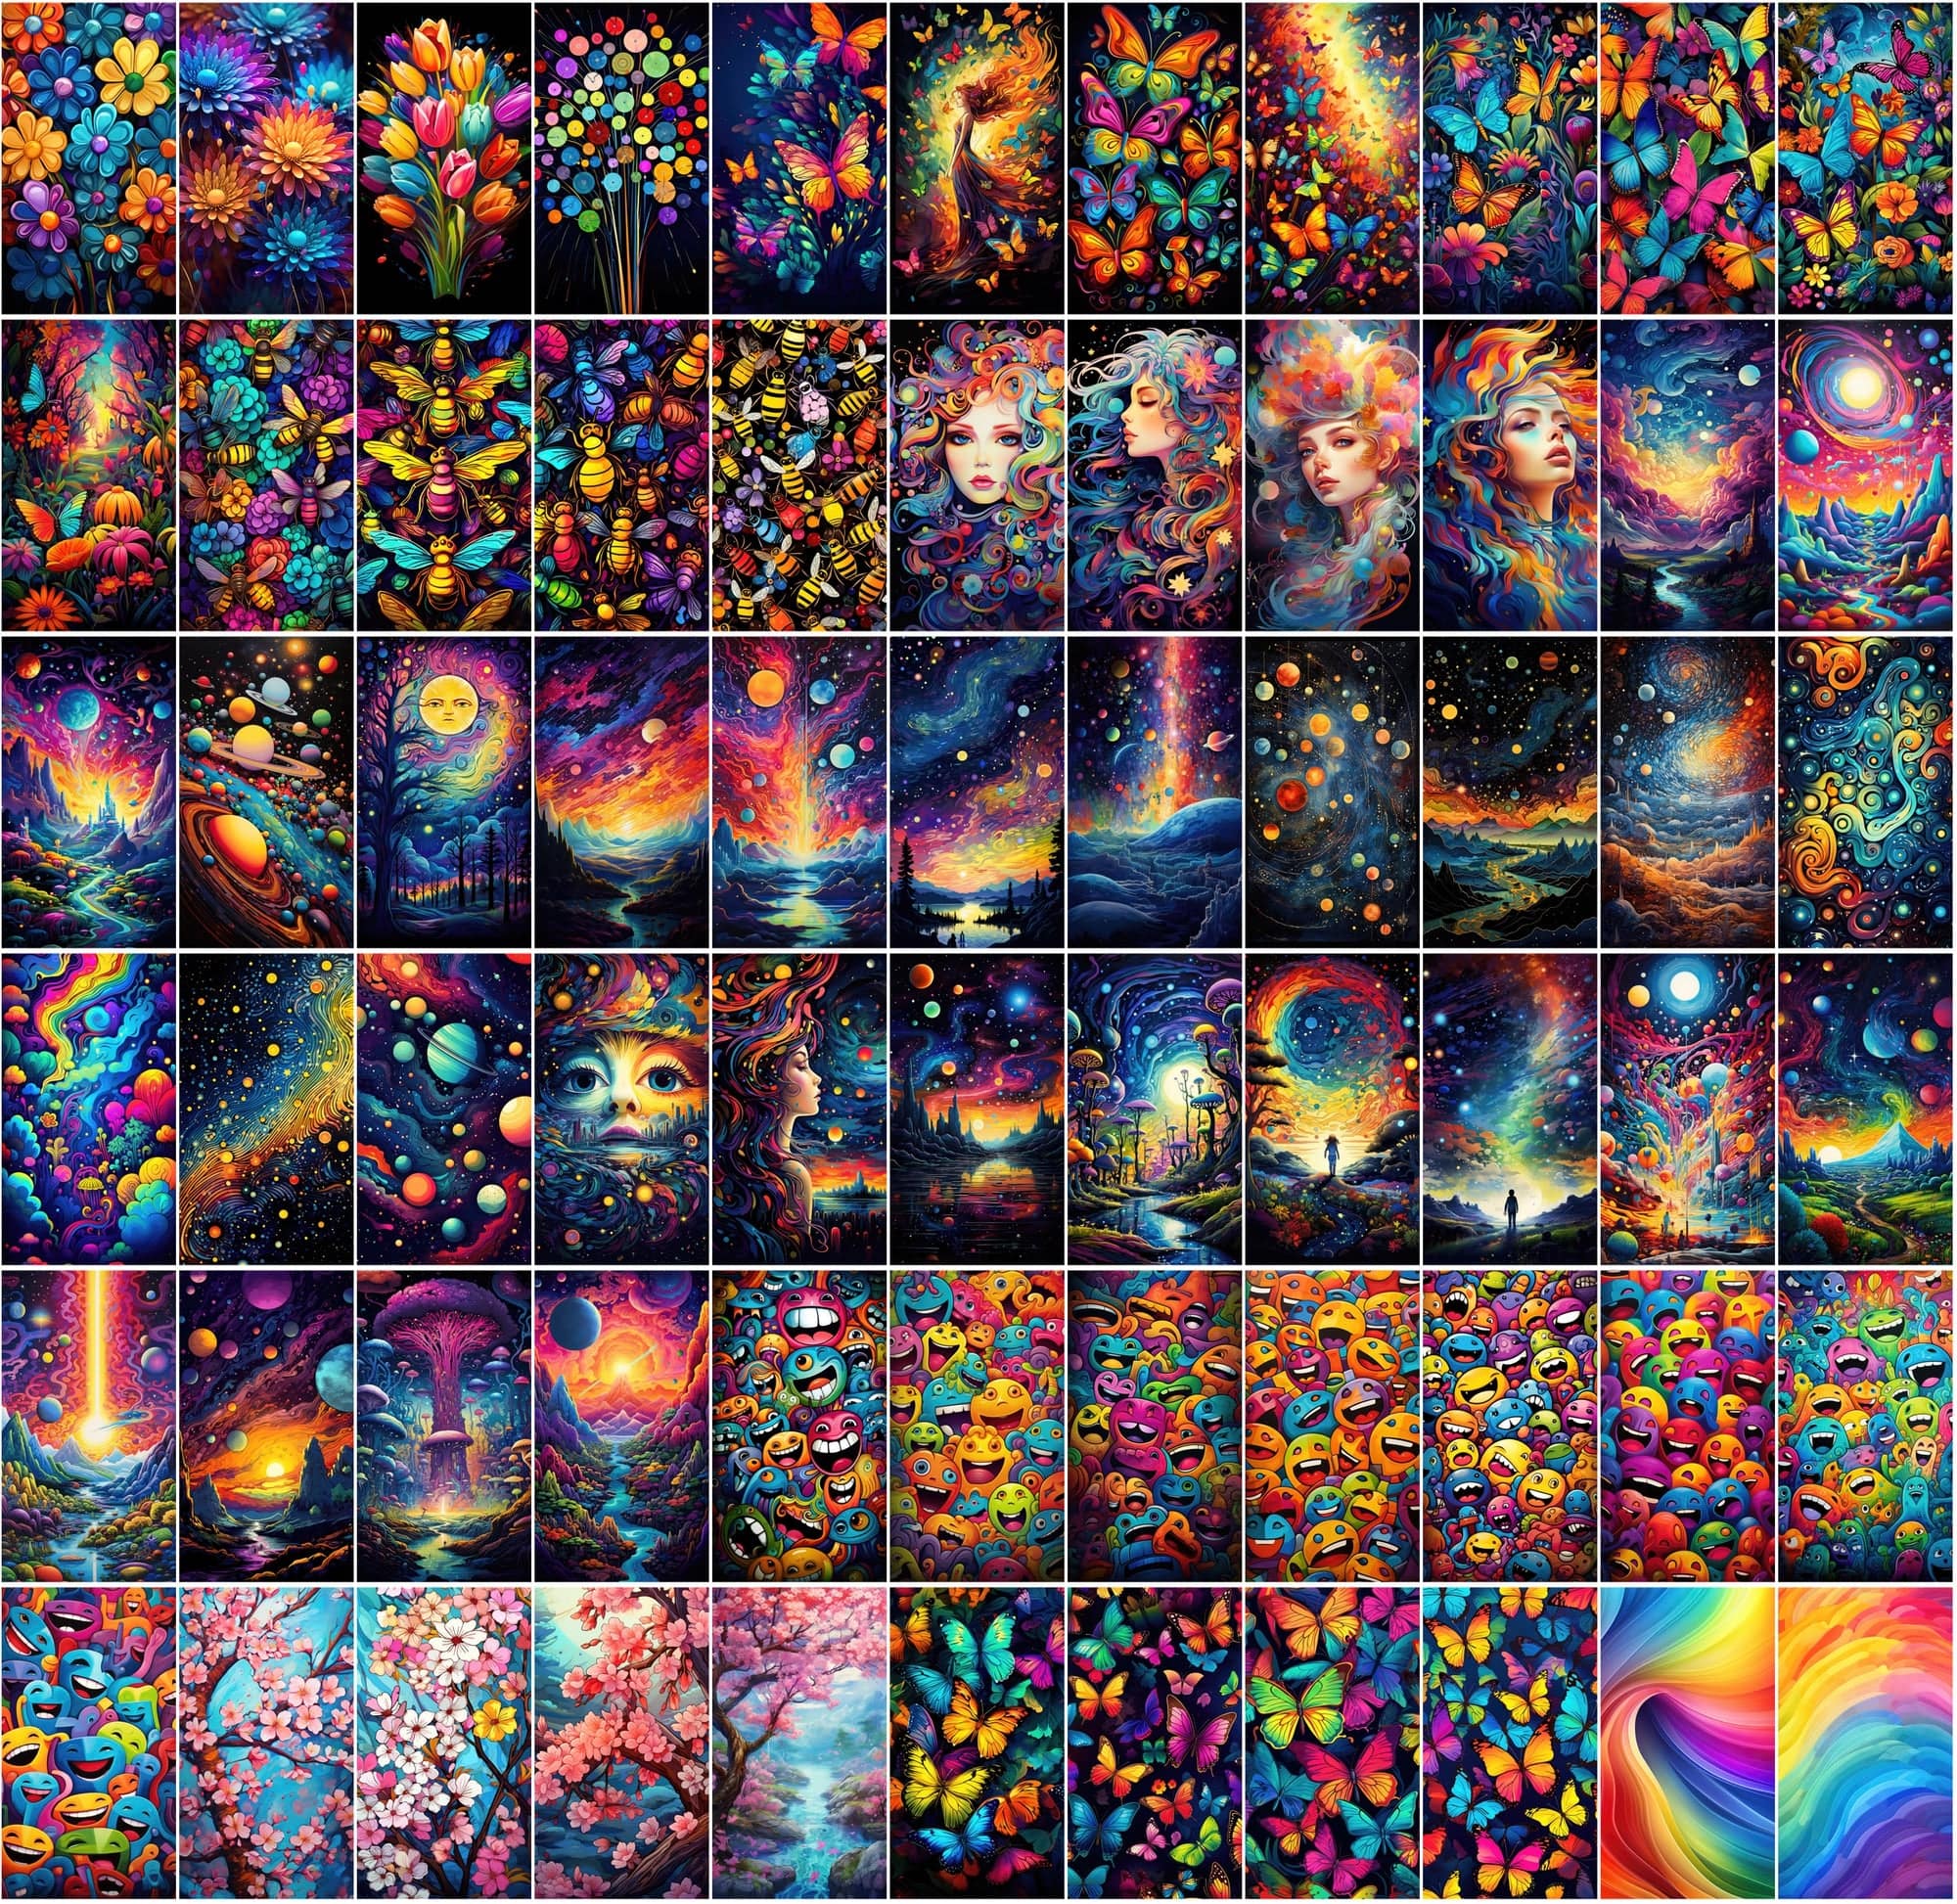 860+ Colorful PNG Poster Images: Astral, Celestial, Blossoms, Alien Worlds, Space Exploration, and More - High Resolution, Commercial License Included Digital Download Sumobundle